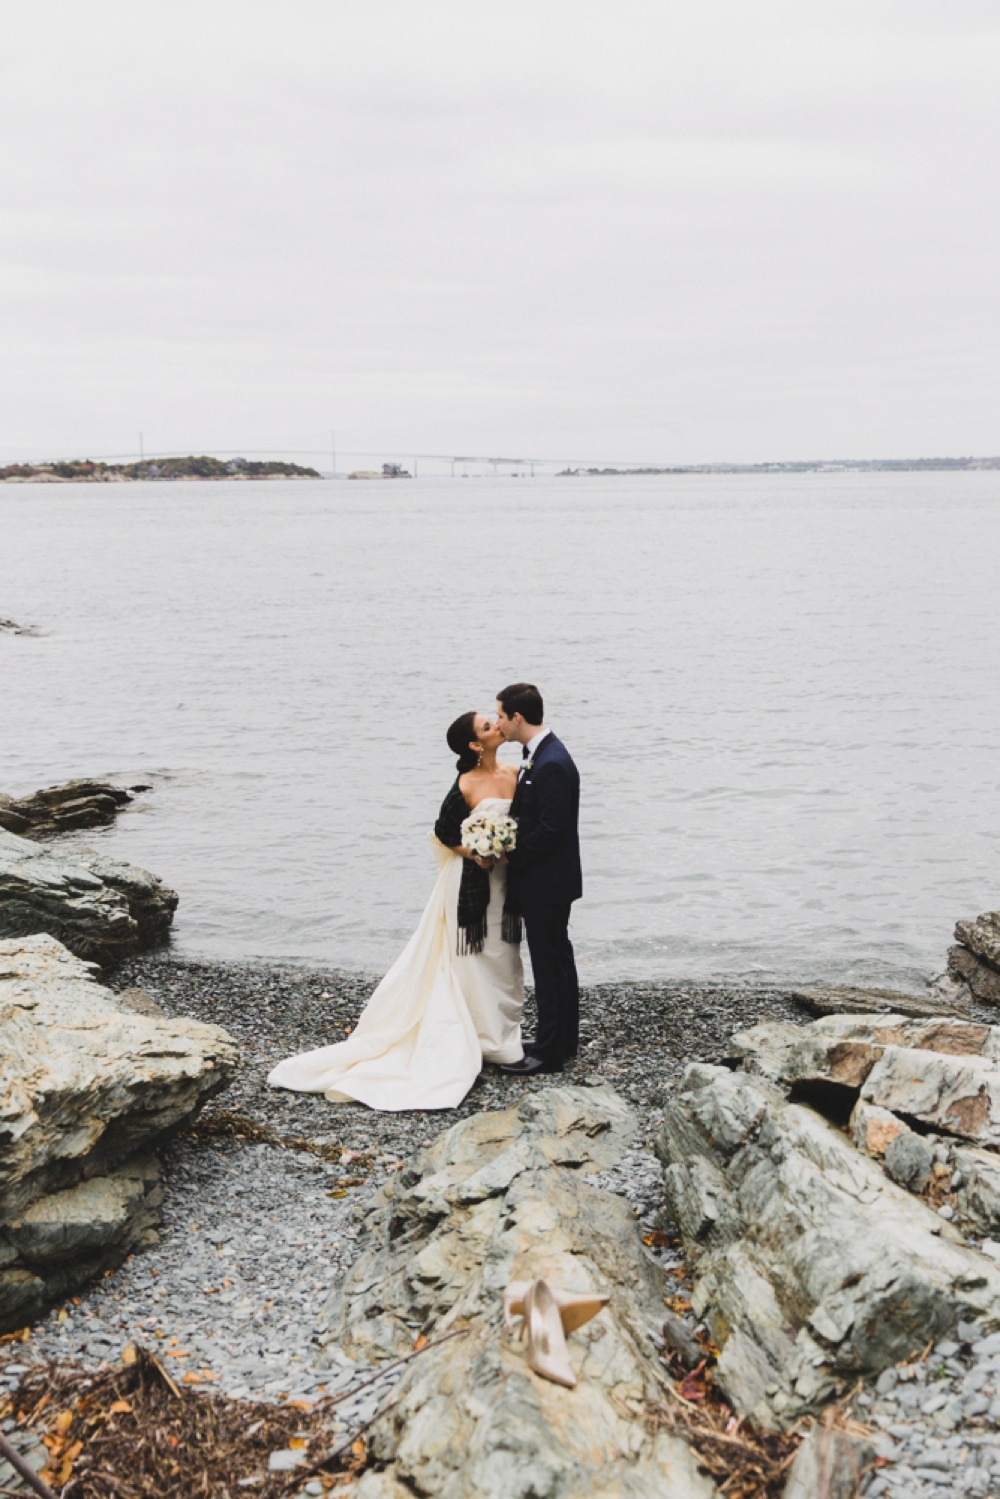 A portrait of a bride and groom by the sea during their wedding at the Castle Hill Inn in Newport, Rhode Island